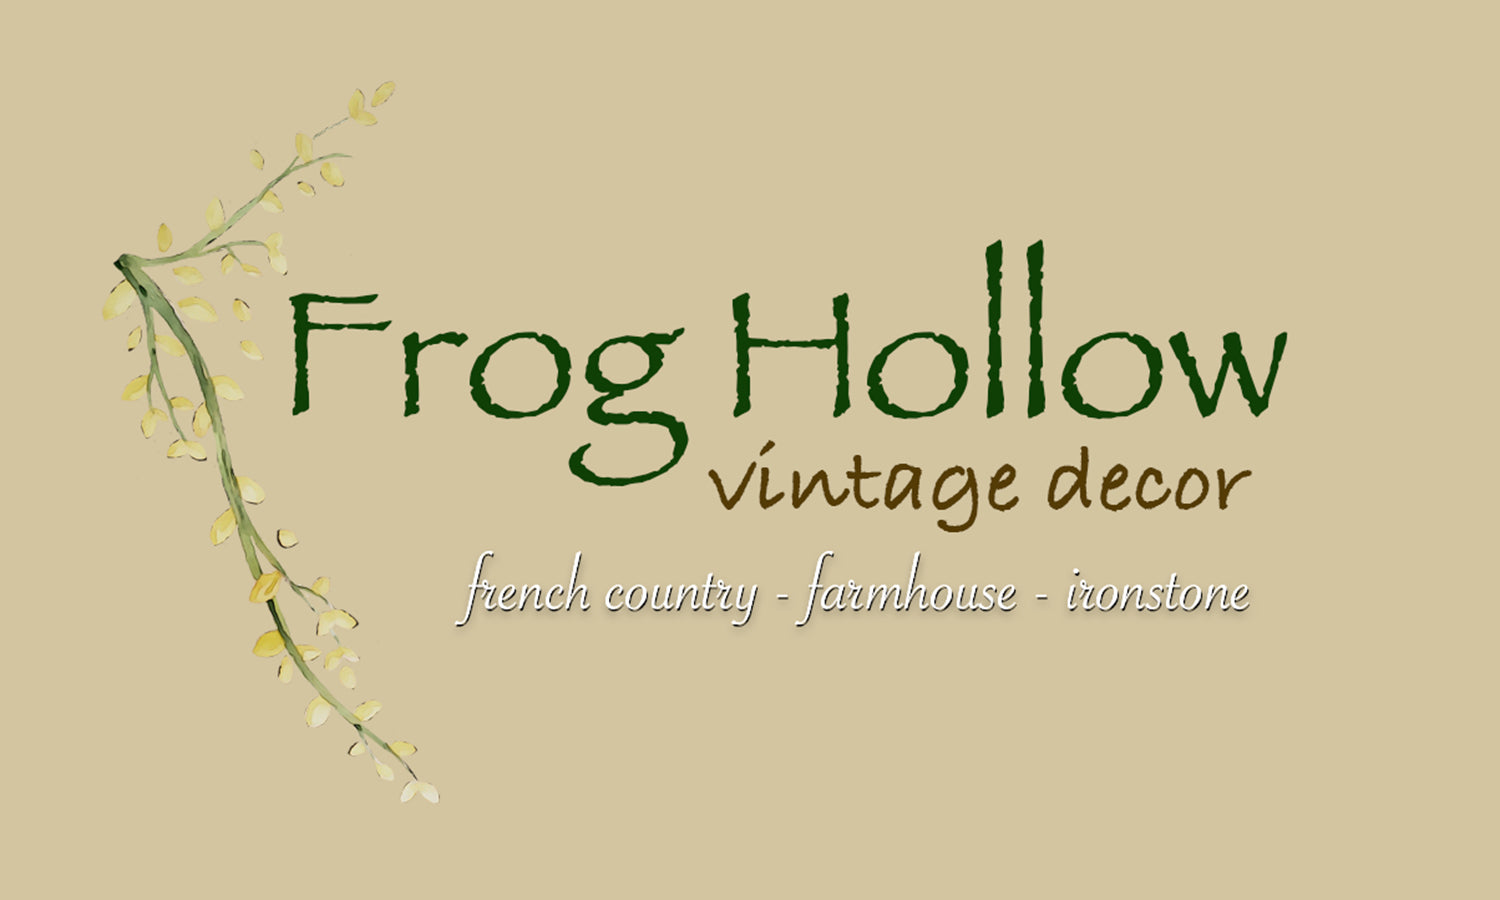 Antique ironstone pudding molds – Frog Hollow vintage decor